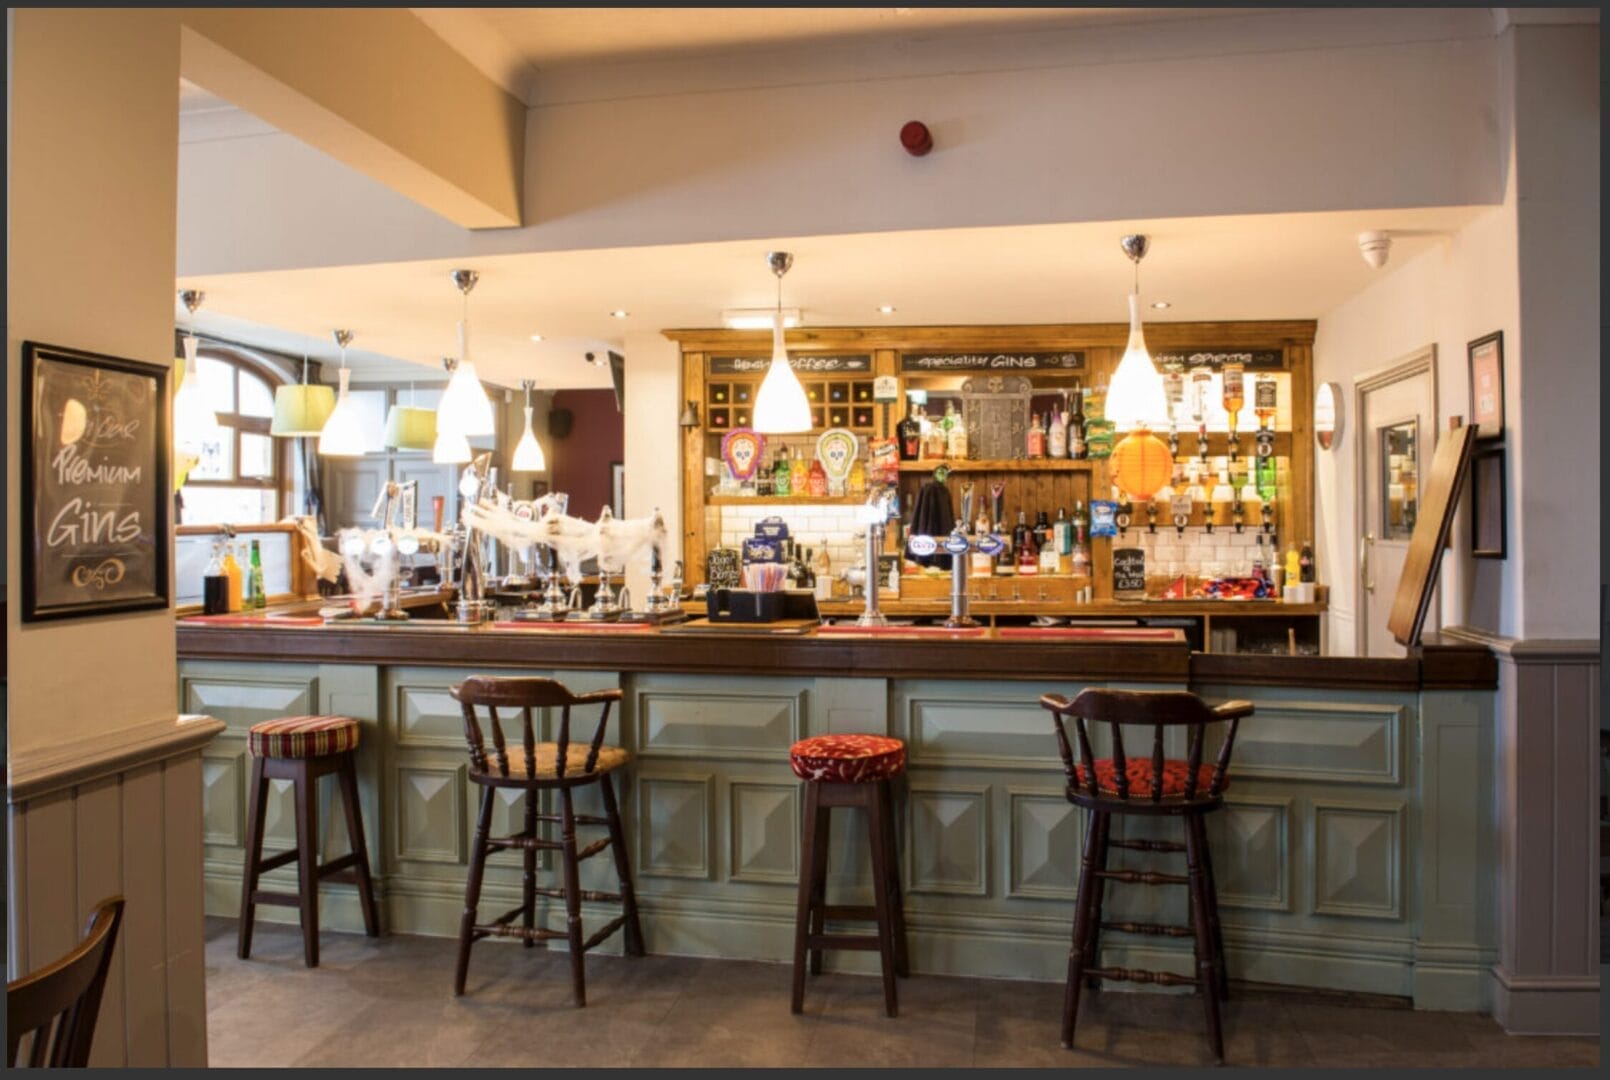 Lease A Pub In Warrington – The Hawthorne Is Available !